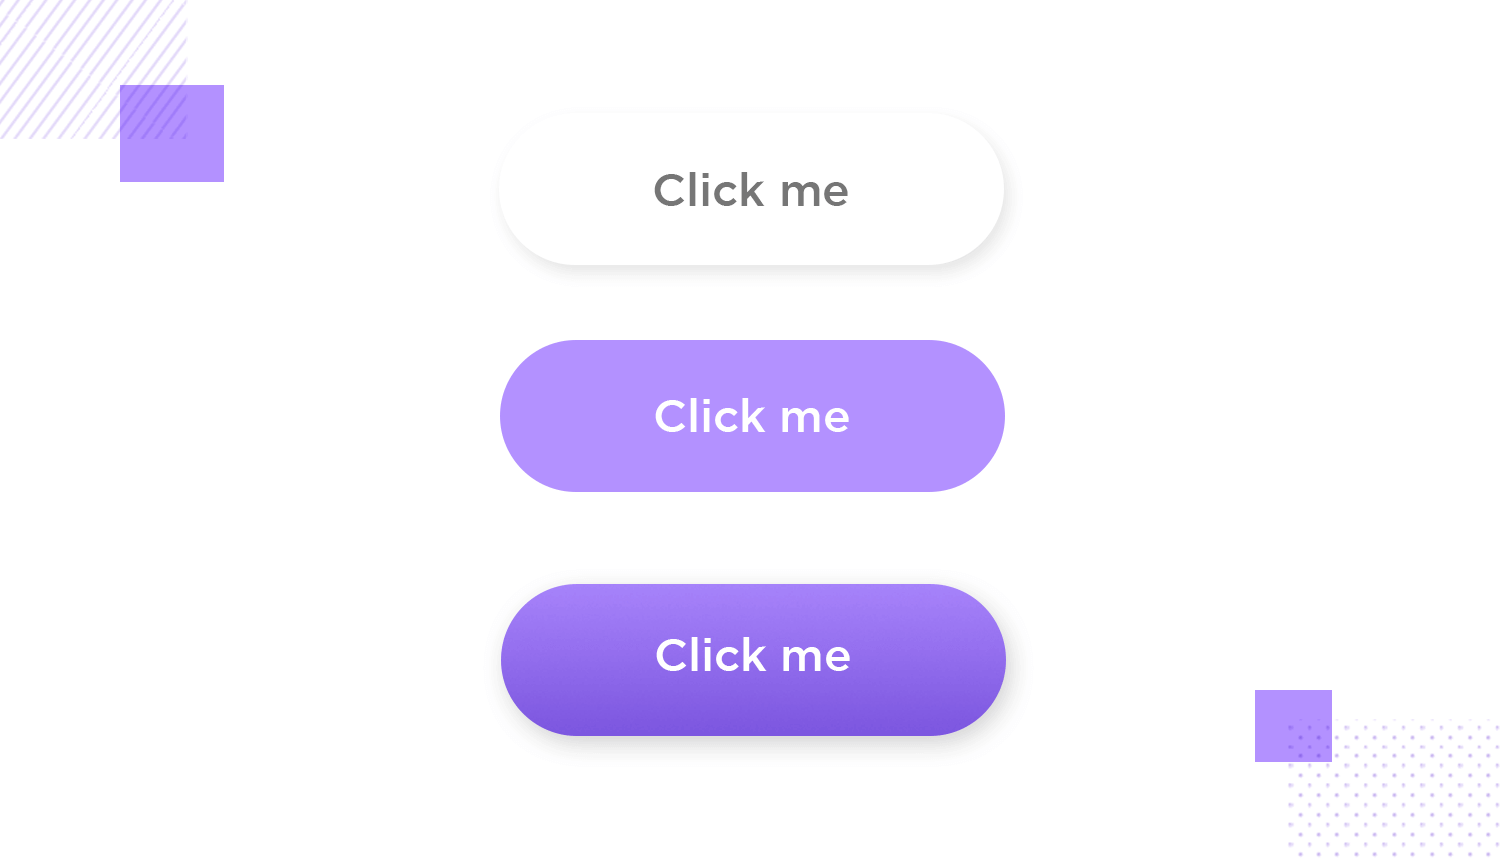 usability problems in buttons and neumorphism